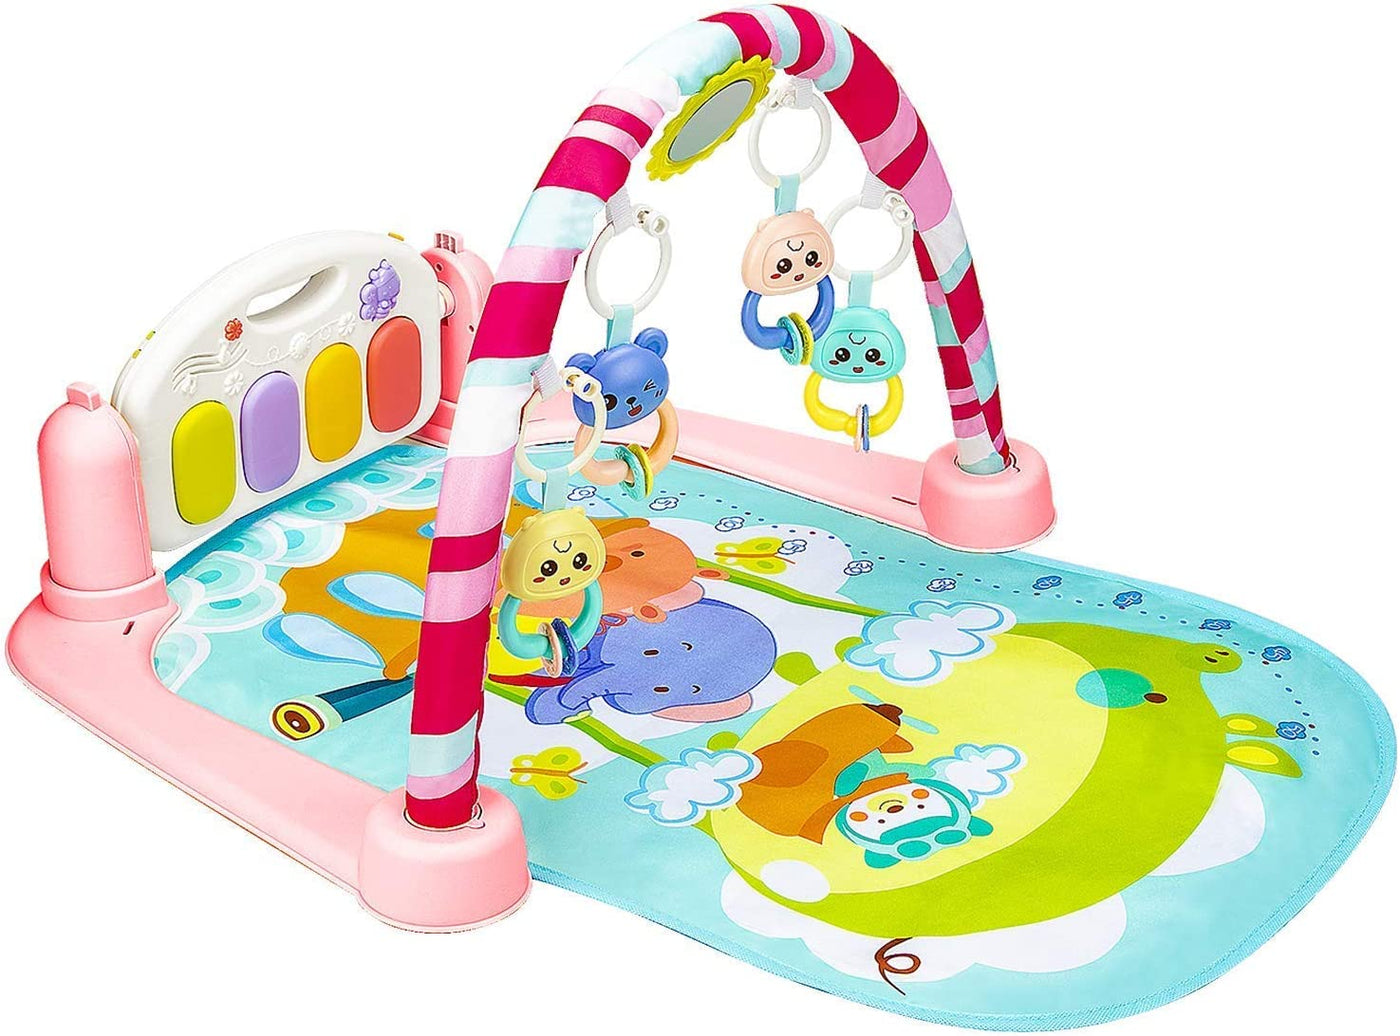 Dubkart Infant Care 3in1 Baby Activity Play Gym Mat Music & Lights